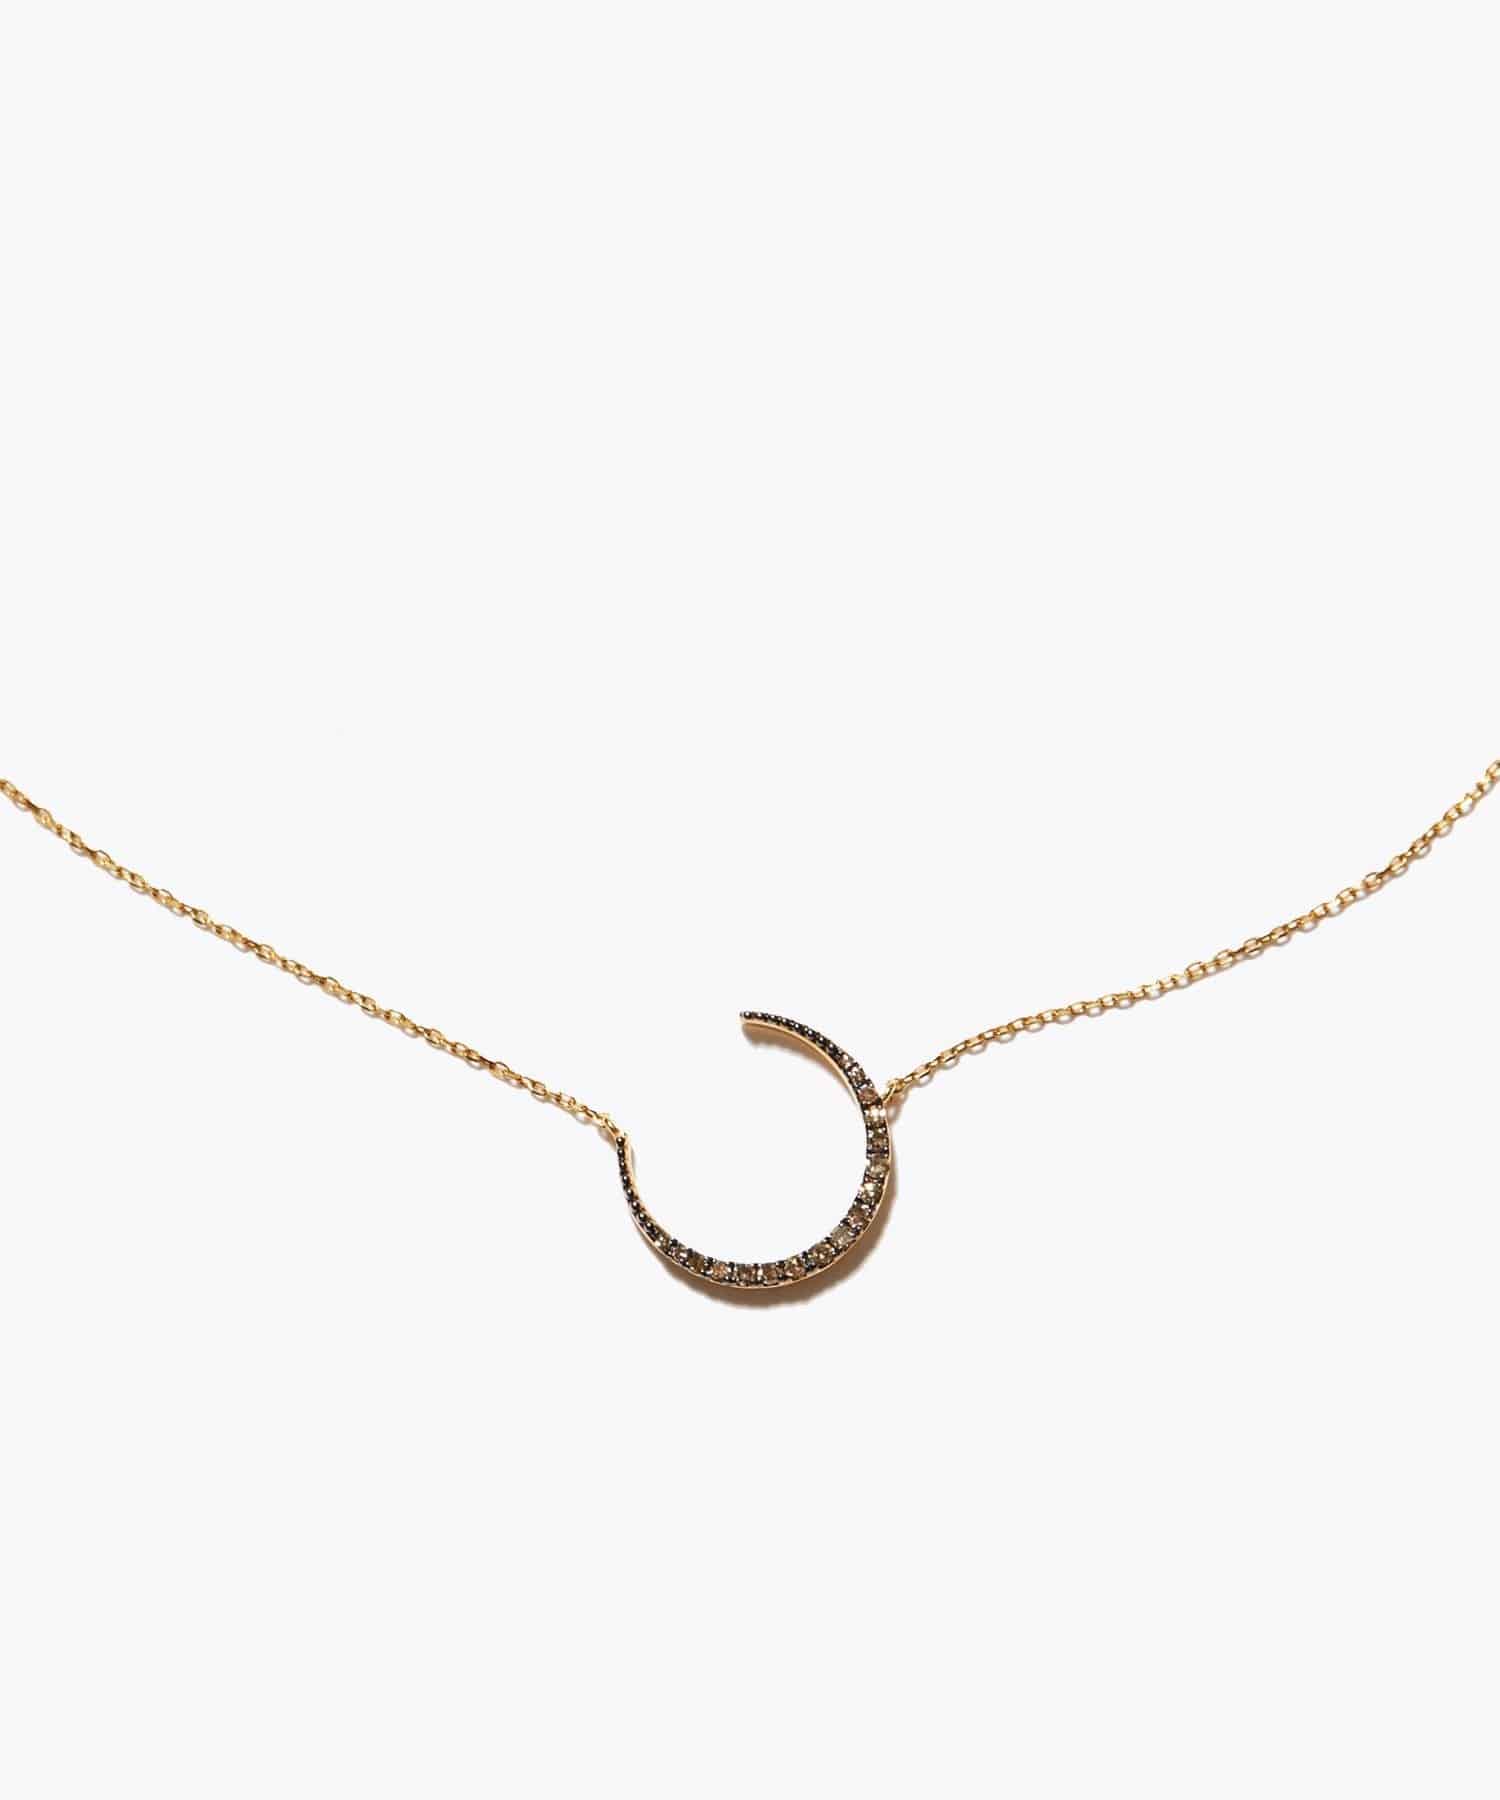 [glimmer] new moon pave diamonds necklace